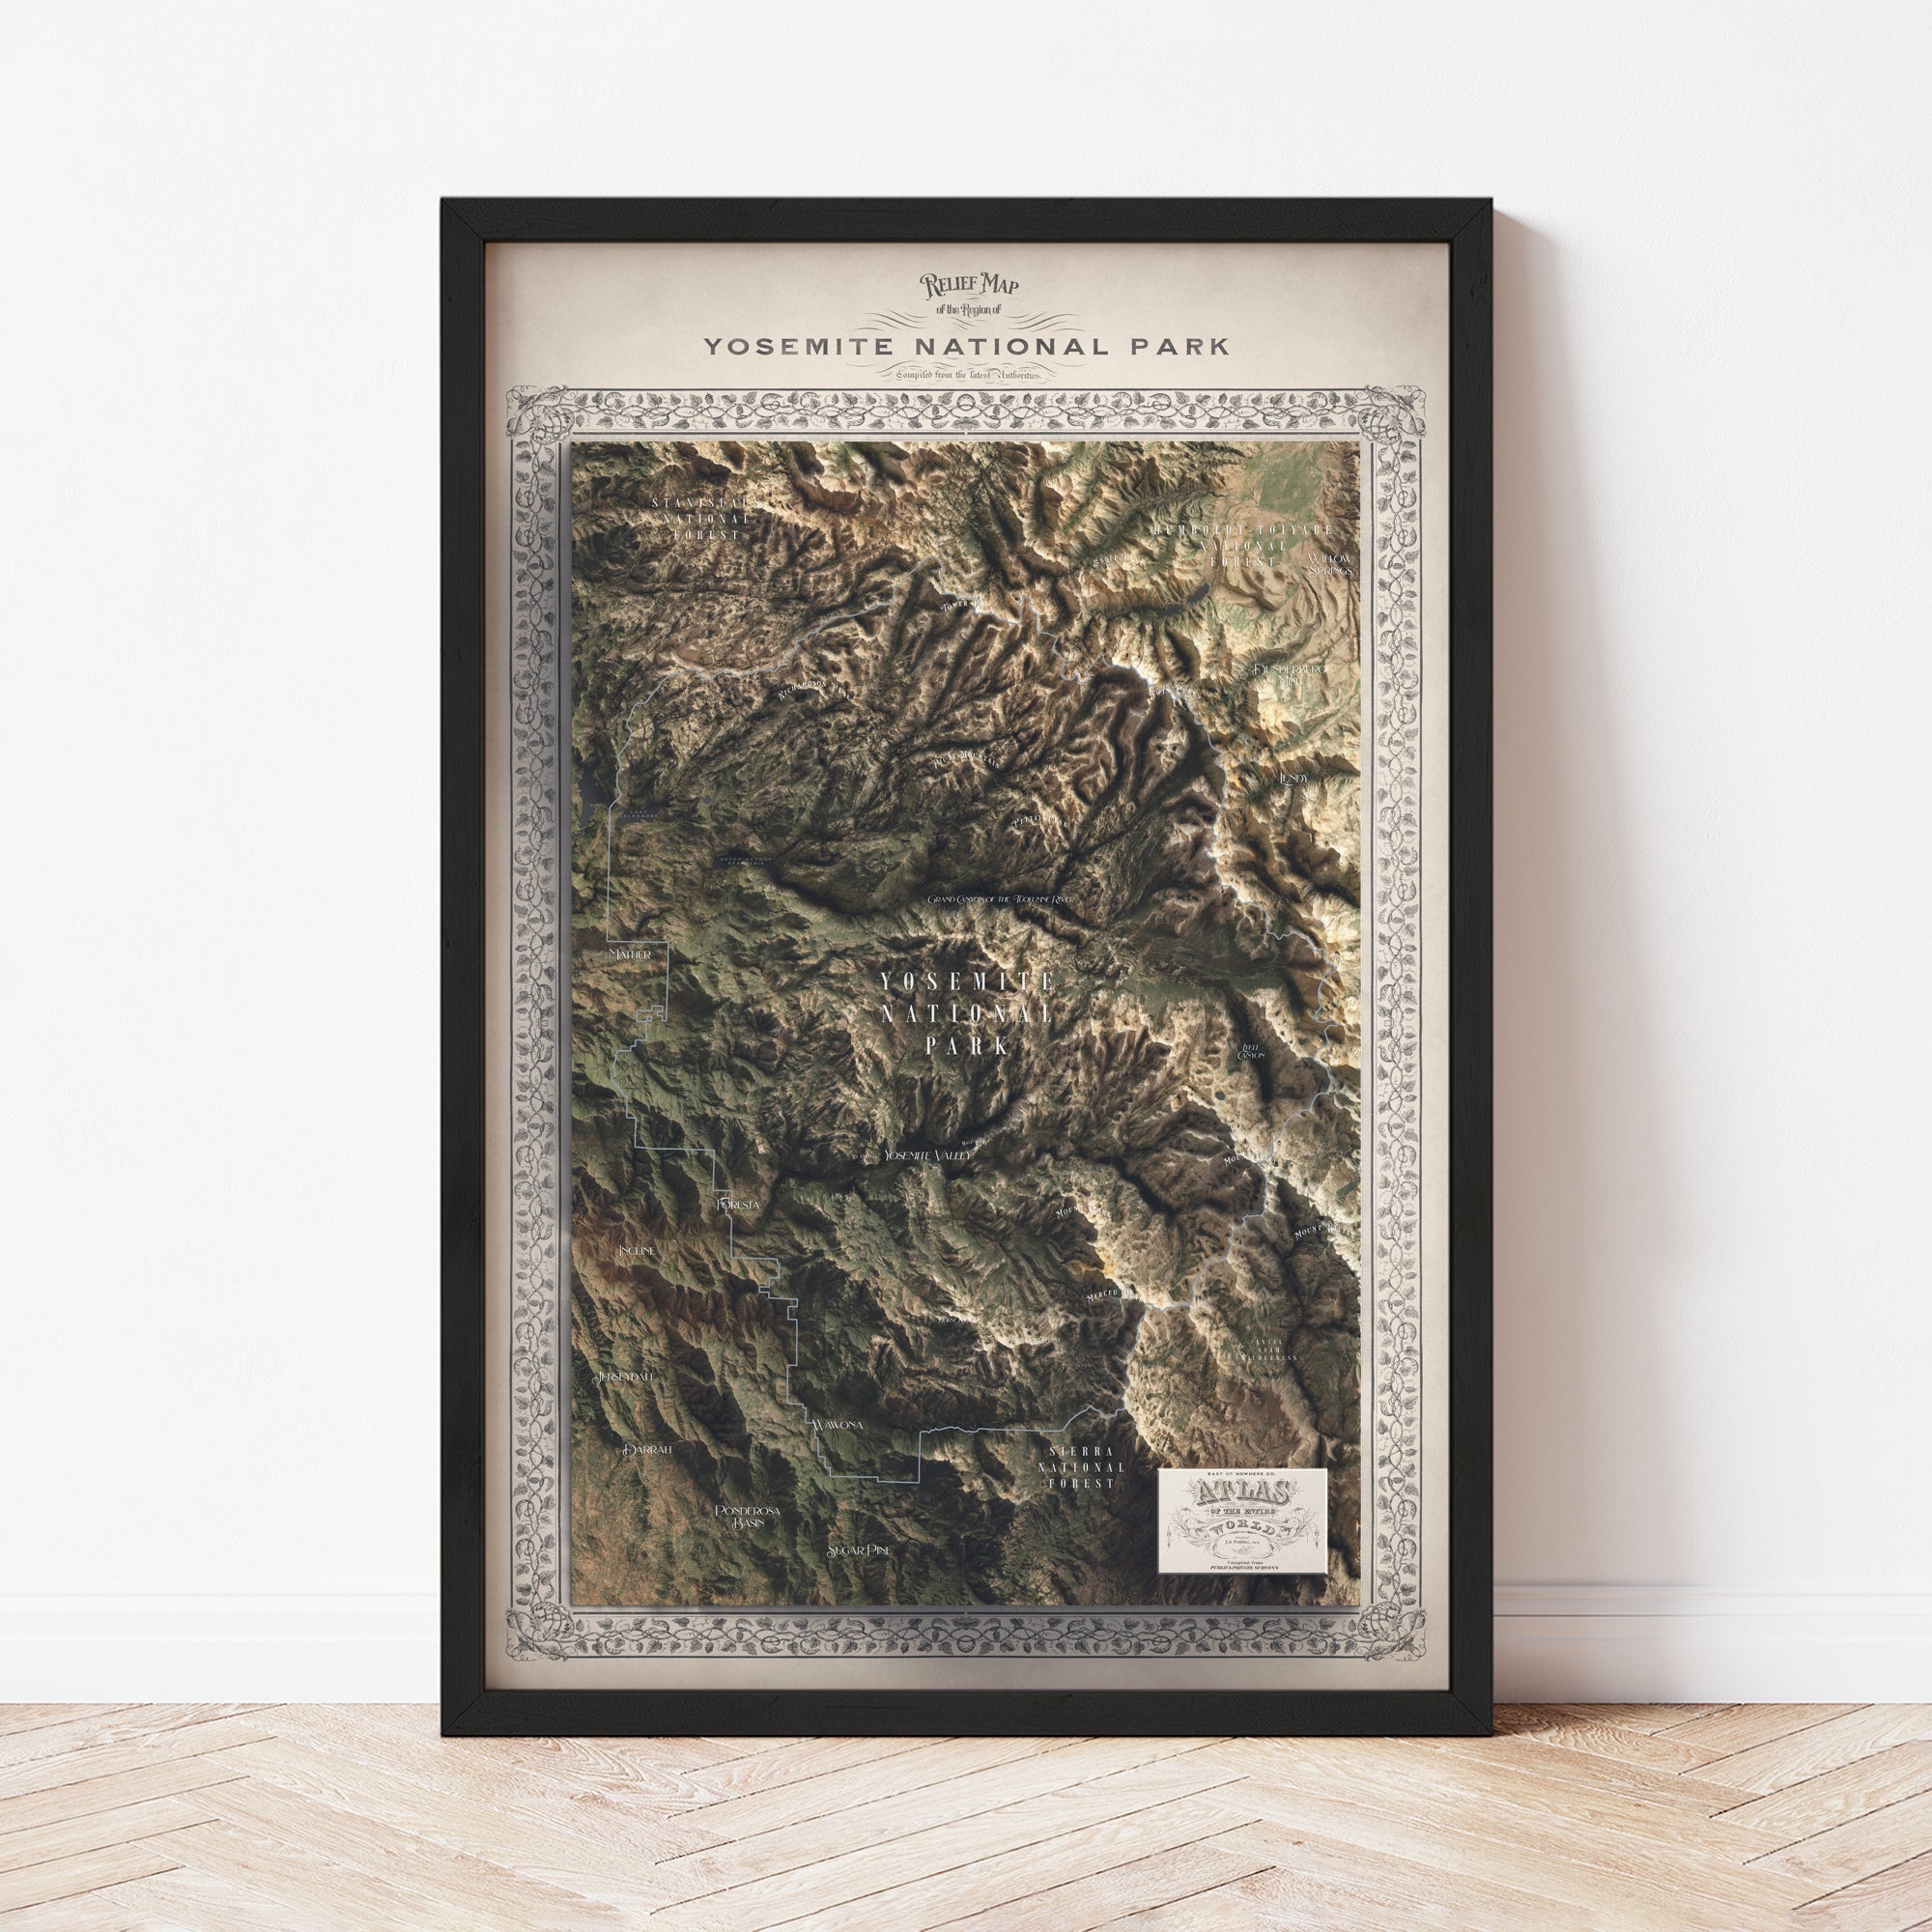 Yosemite National Park Map - The East of Nowhere World Atlas